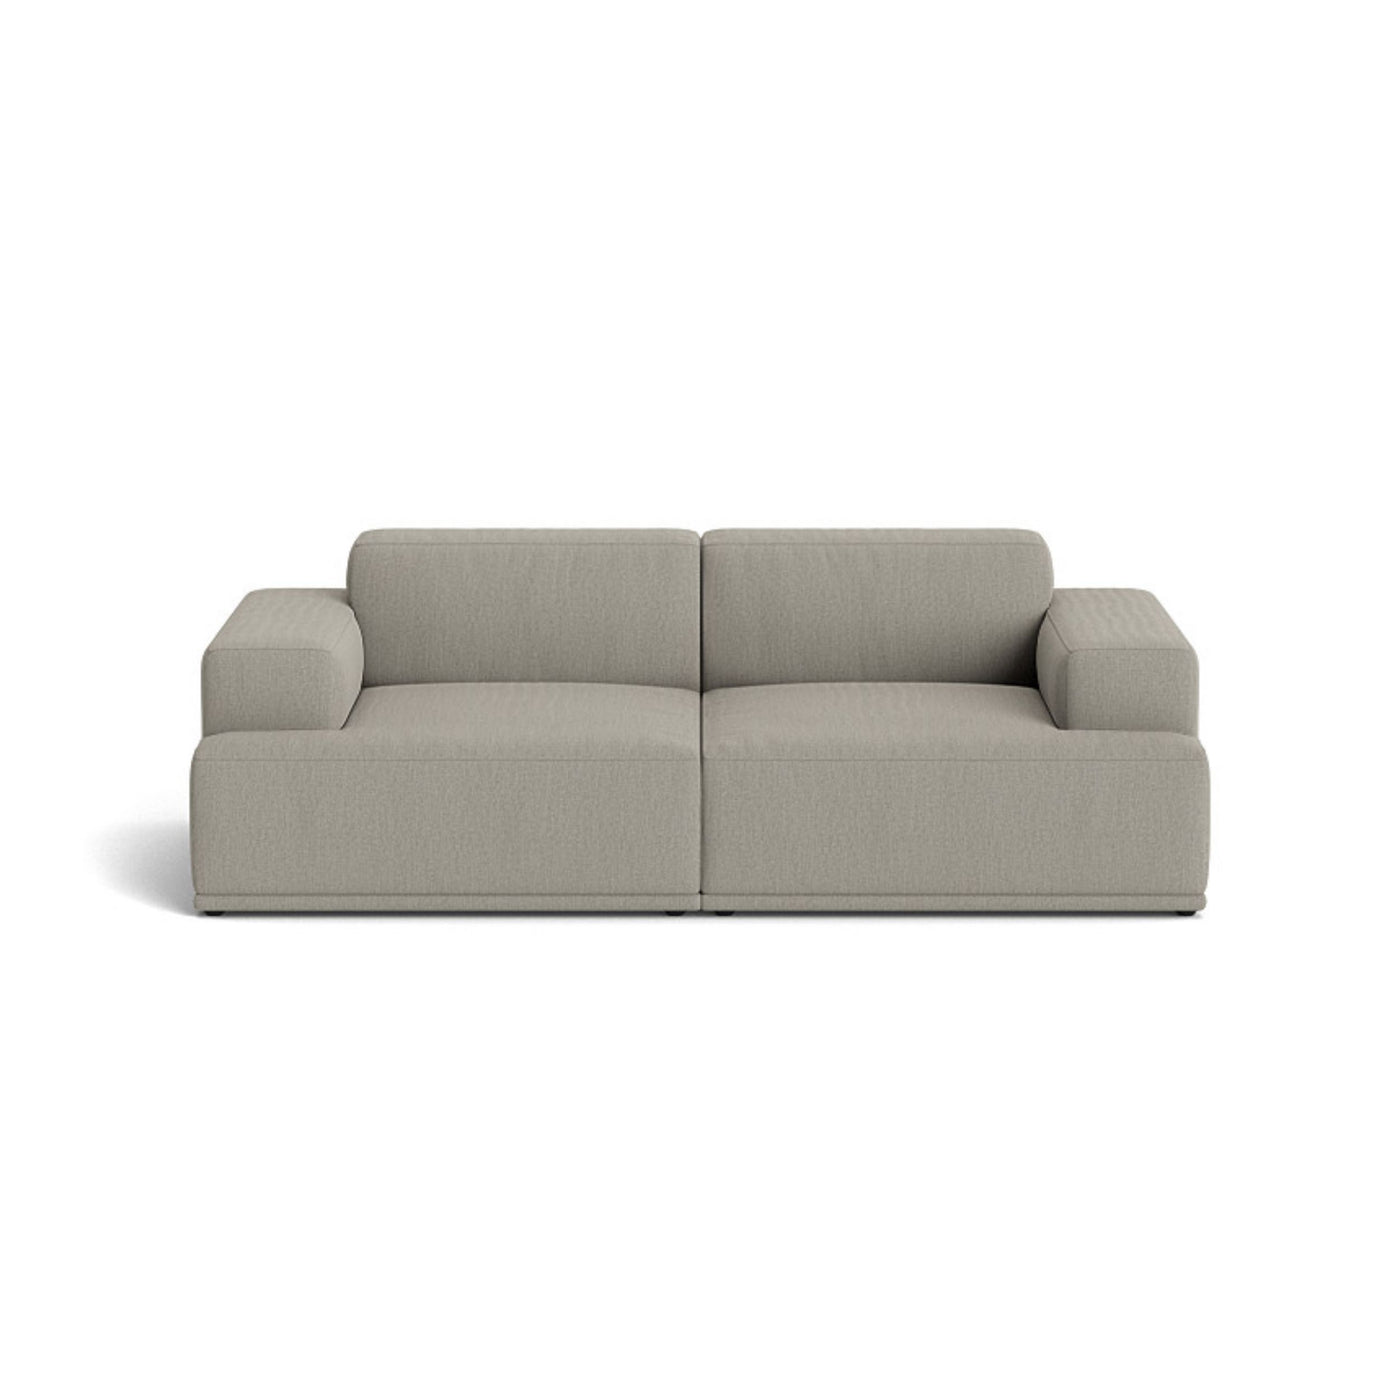 Muuto Connect Soft Modular 2 Seater Sofa, configuration 1. made-to-order from someday designs. #colour_re-wool-218